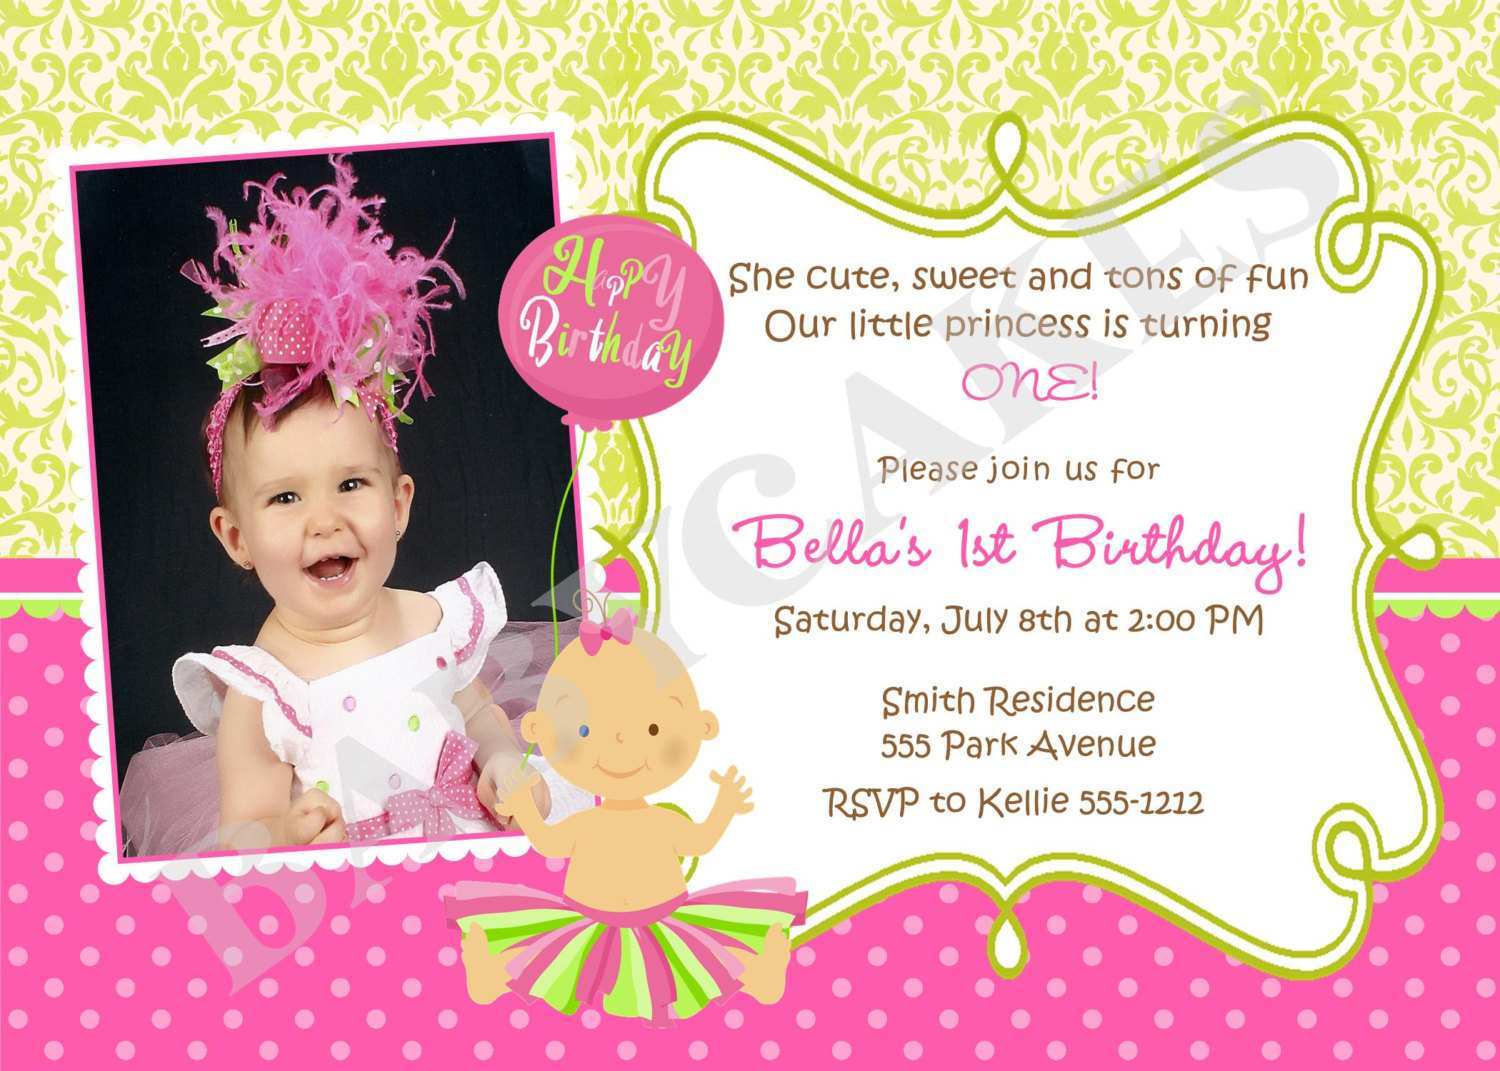 Baby Birthday Invitation Card With Illustration Of Beautiful Royalty Free Cliparts Vectors And Stock Illustration Image 117012485